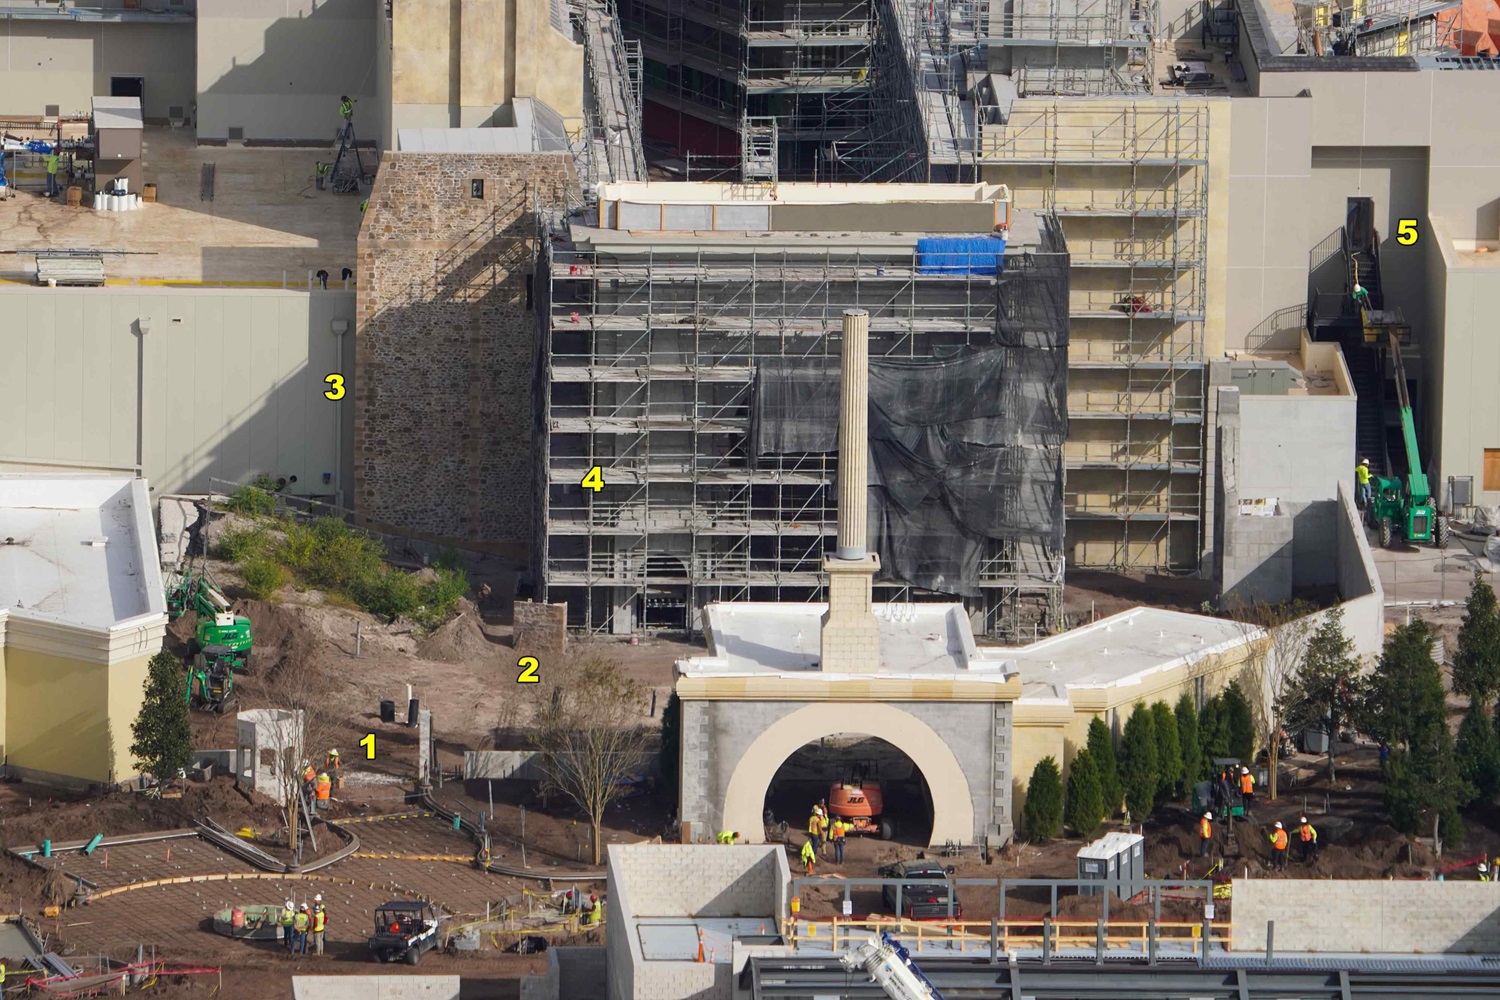 Epic Universe’s Porte Saint-Denis arch behind scaffolding behind the entrance tunnel (Source: Orlando Park Stop)